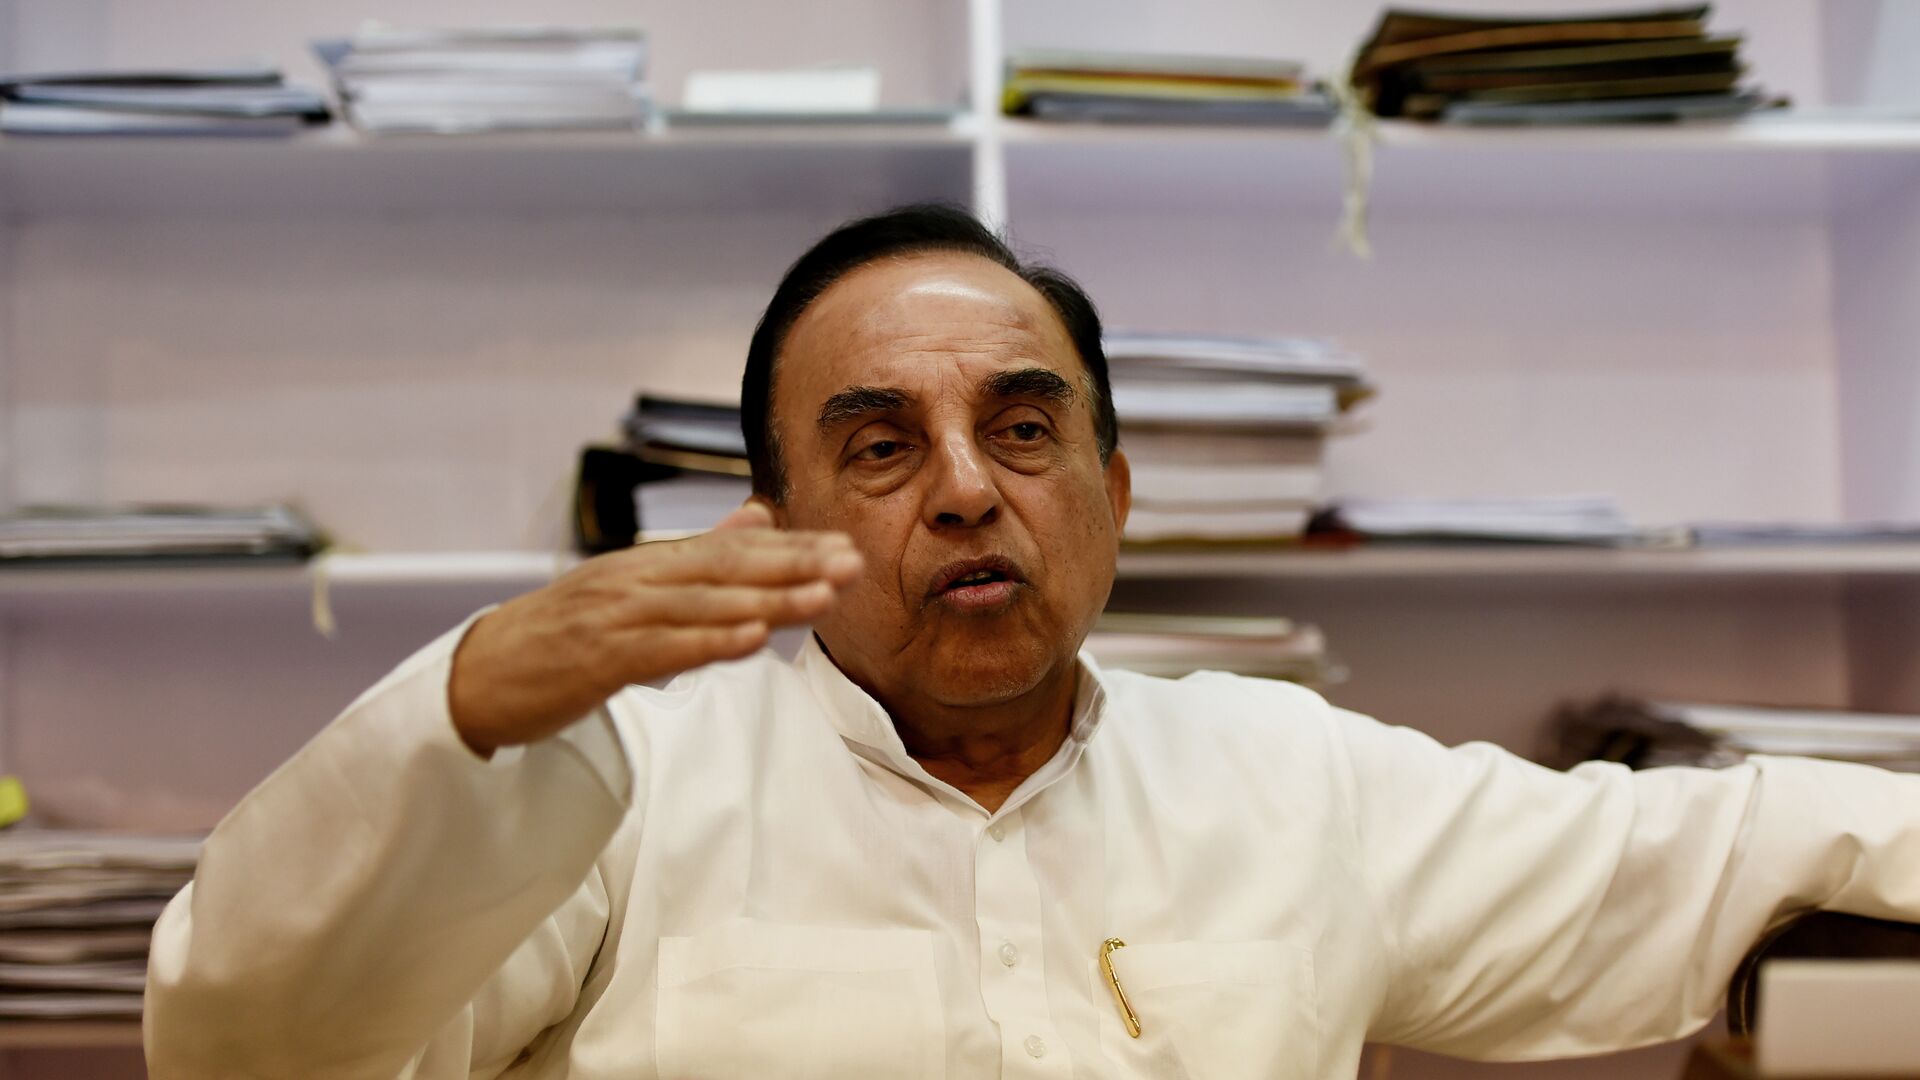 In this photograph taken on May 9, 2016, Subramanian Swamy, an Indian politician and a member of the Rajya Sabha, the upper house of the Indian parliament, gestures during an interview with AFP in New Delhi - Sputnik International, 1920, 16.12.2021